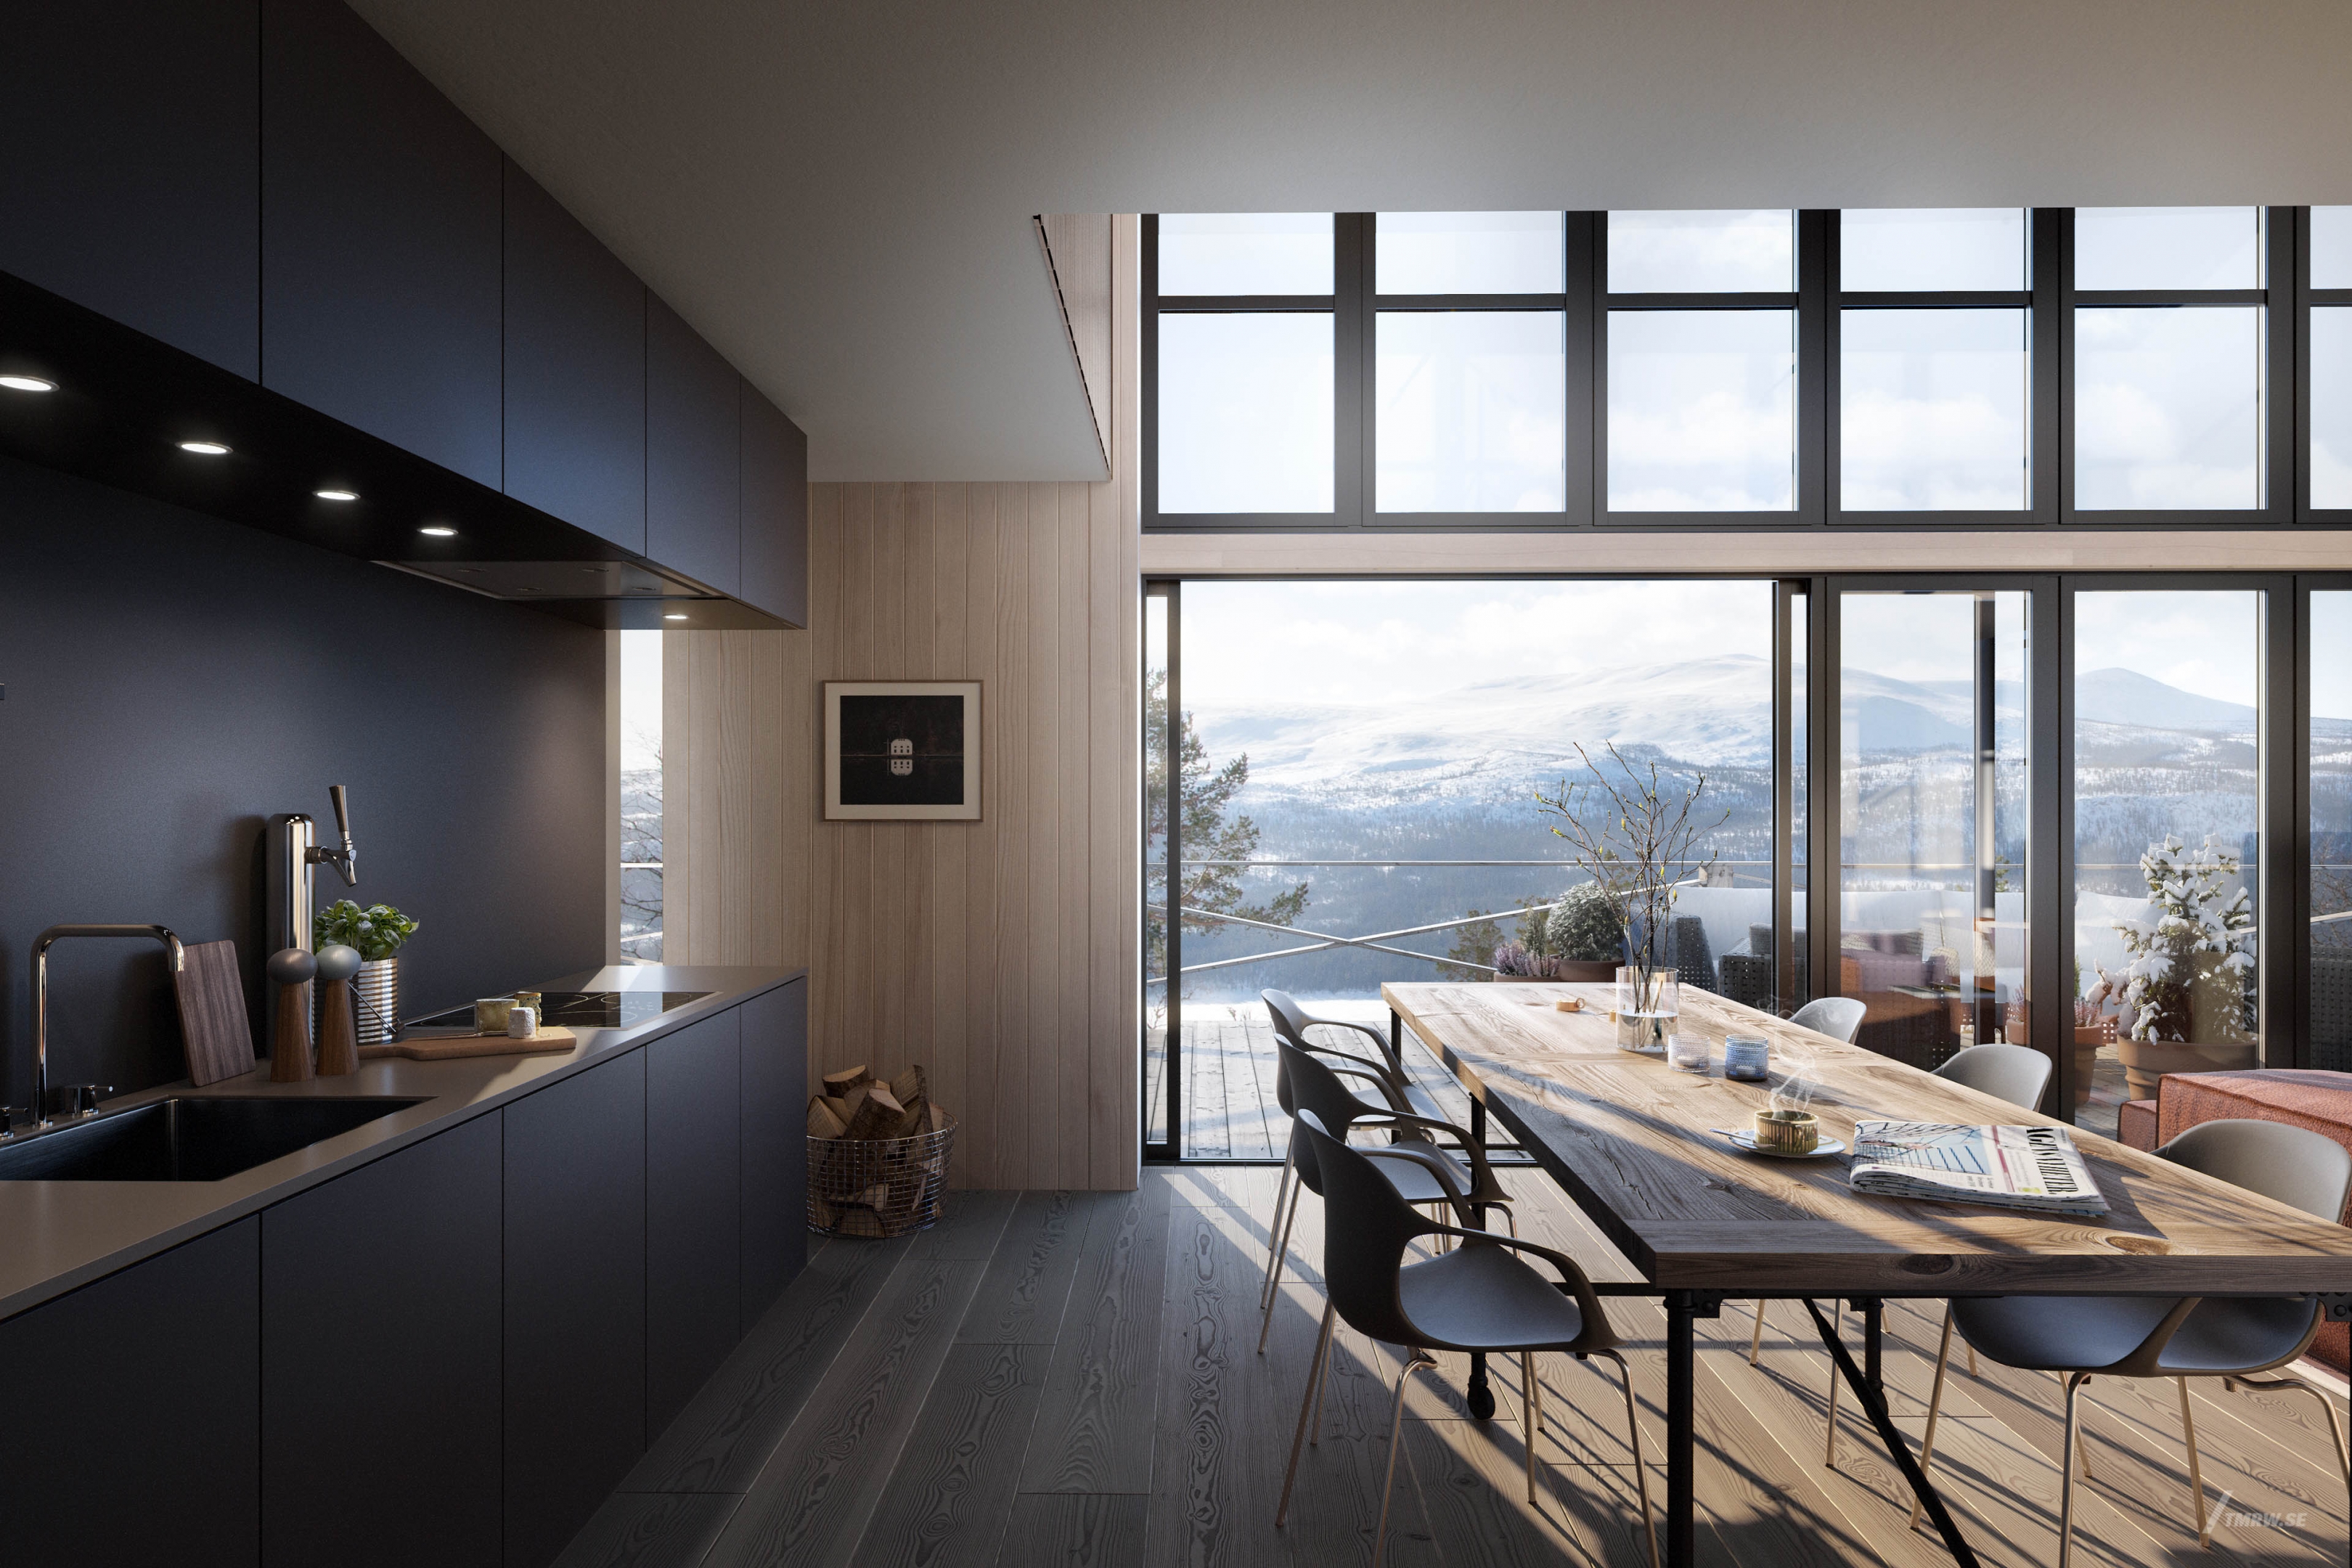 Architectural visualization of Lofsdalen for Bleck, interior of living room in day light, view of winter landscape